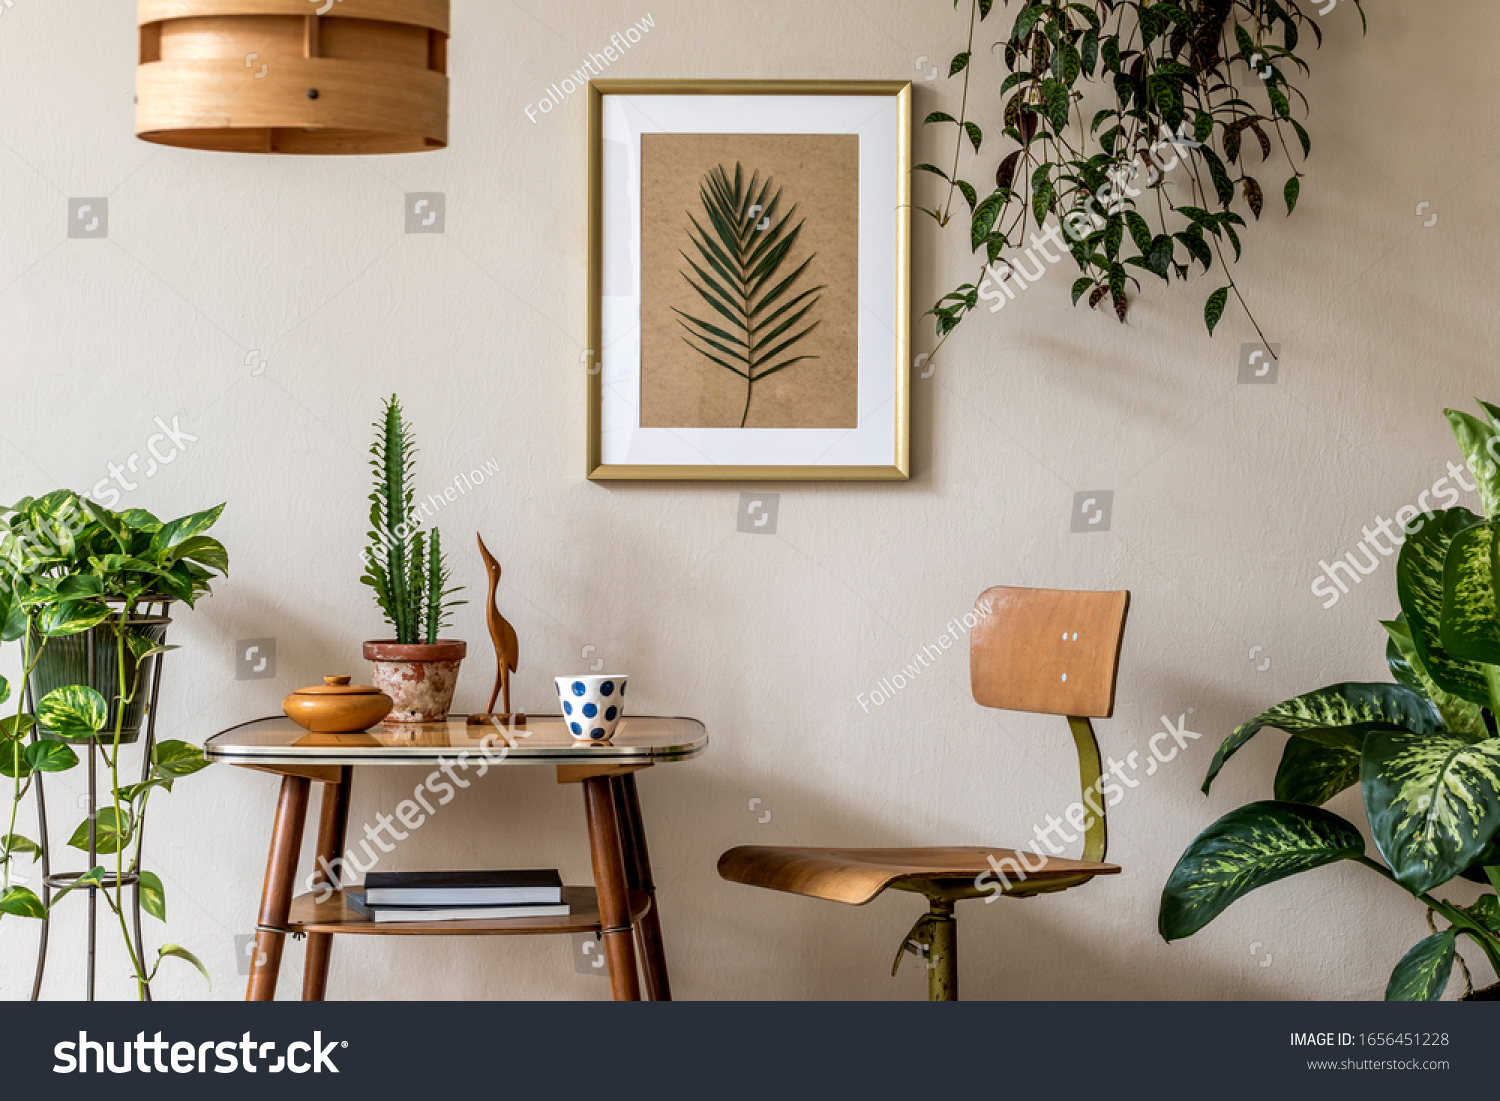 Retro interior design of living room with stylish vintage chair and table, plants, cacti, personal accessories and gold mock up poster frame on the beige wall. Elegant home decor. Template.  #1656451228